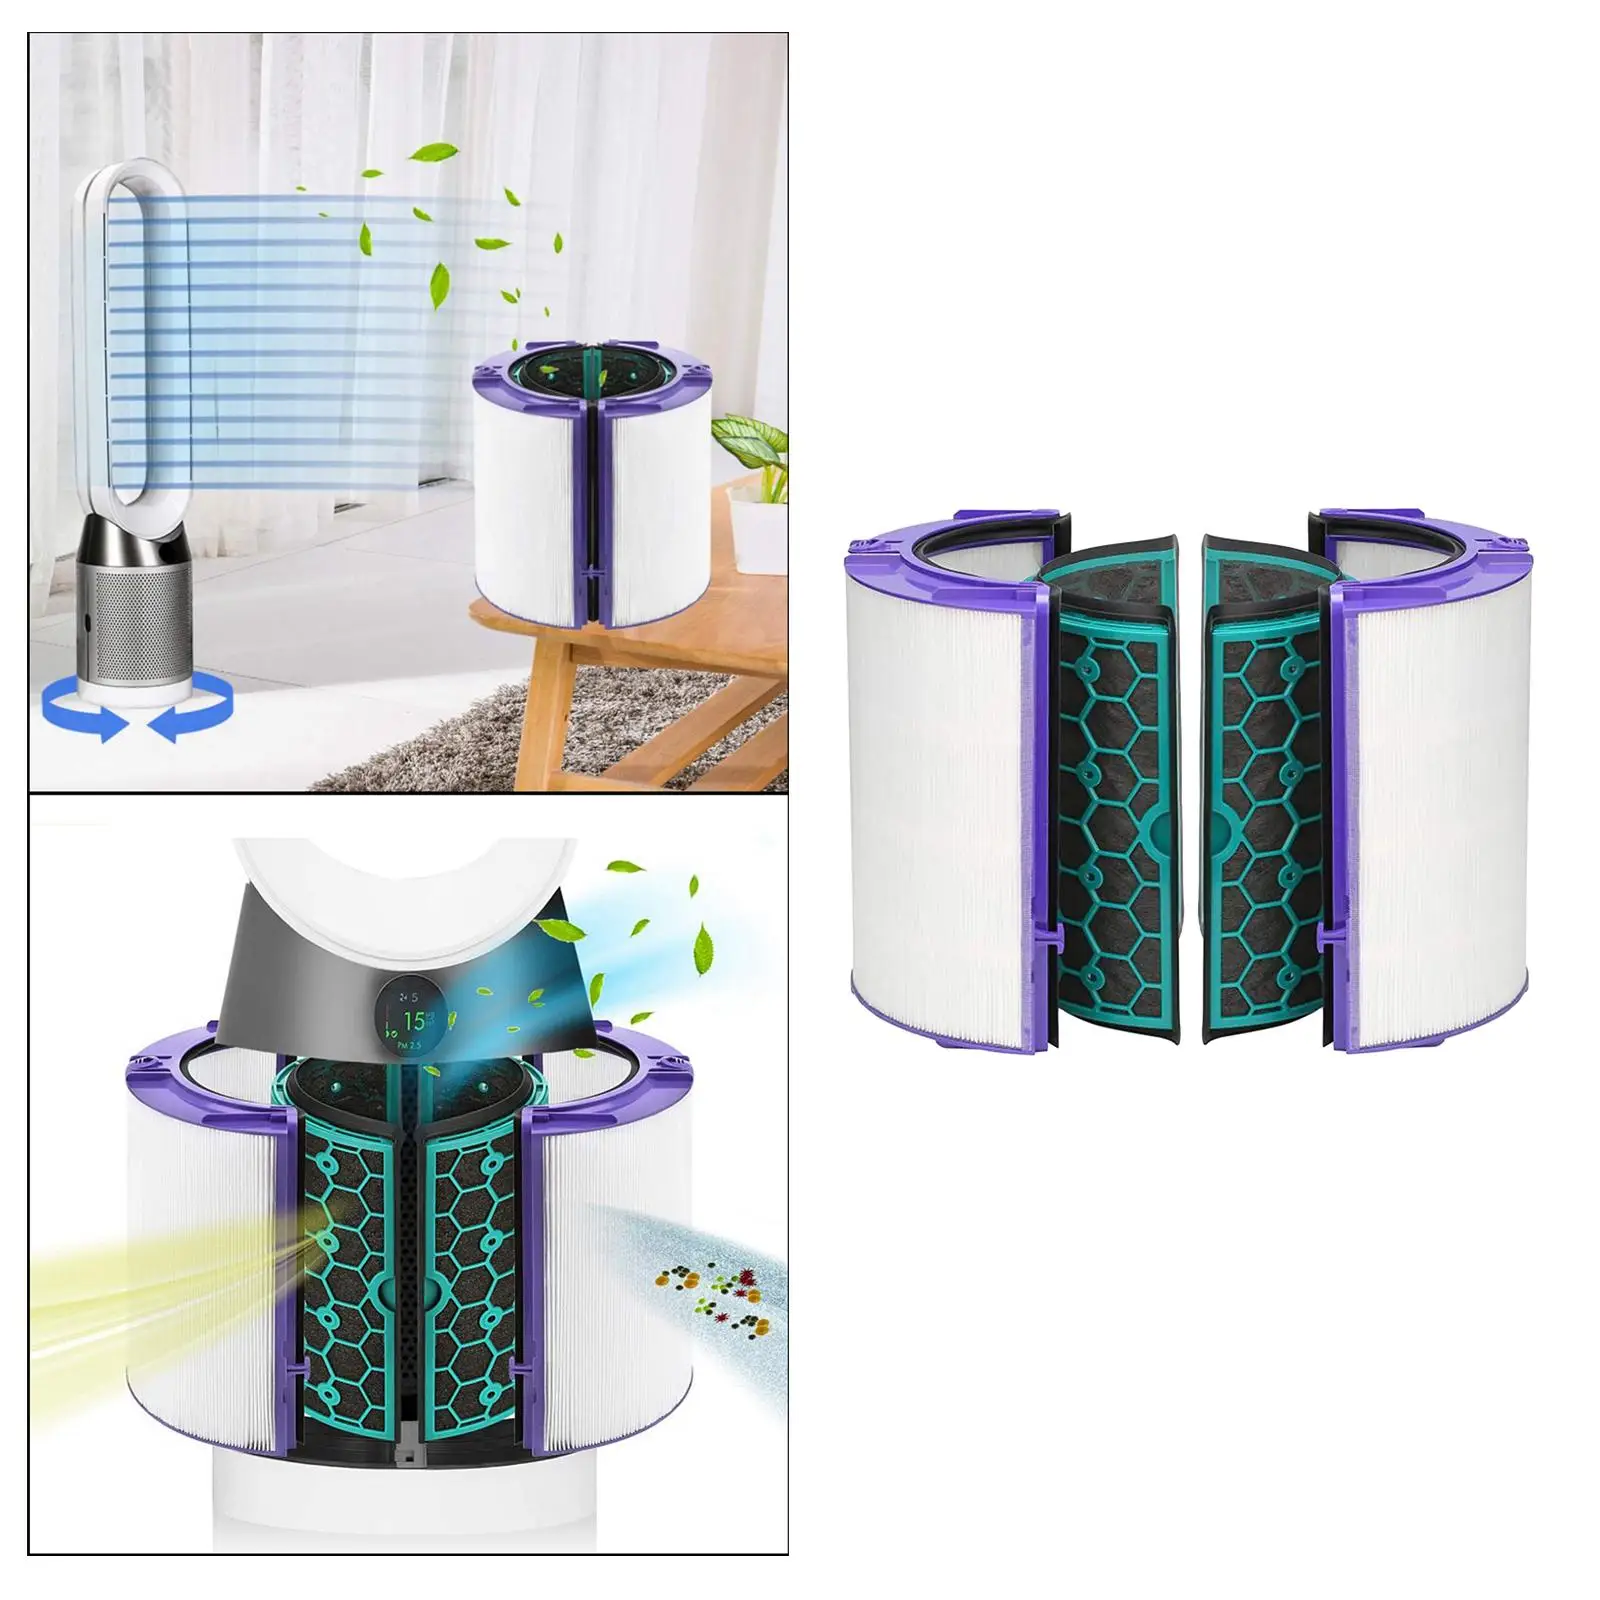 HEPA Filter & Activated Carbon Filter for Dyson TP04 TP05 HP04 Pure Cool Hepa Purifier Sealed Two Stage